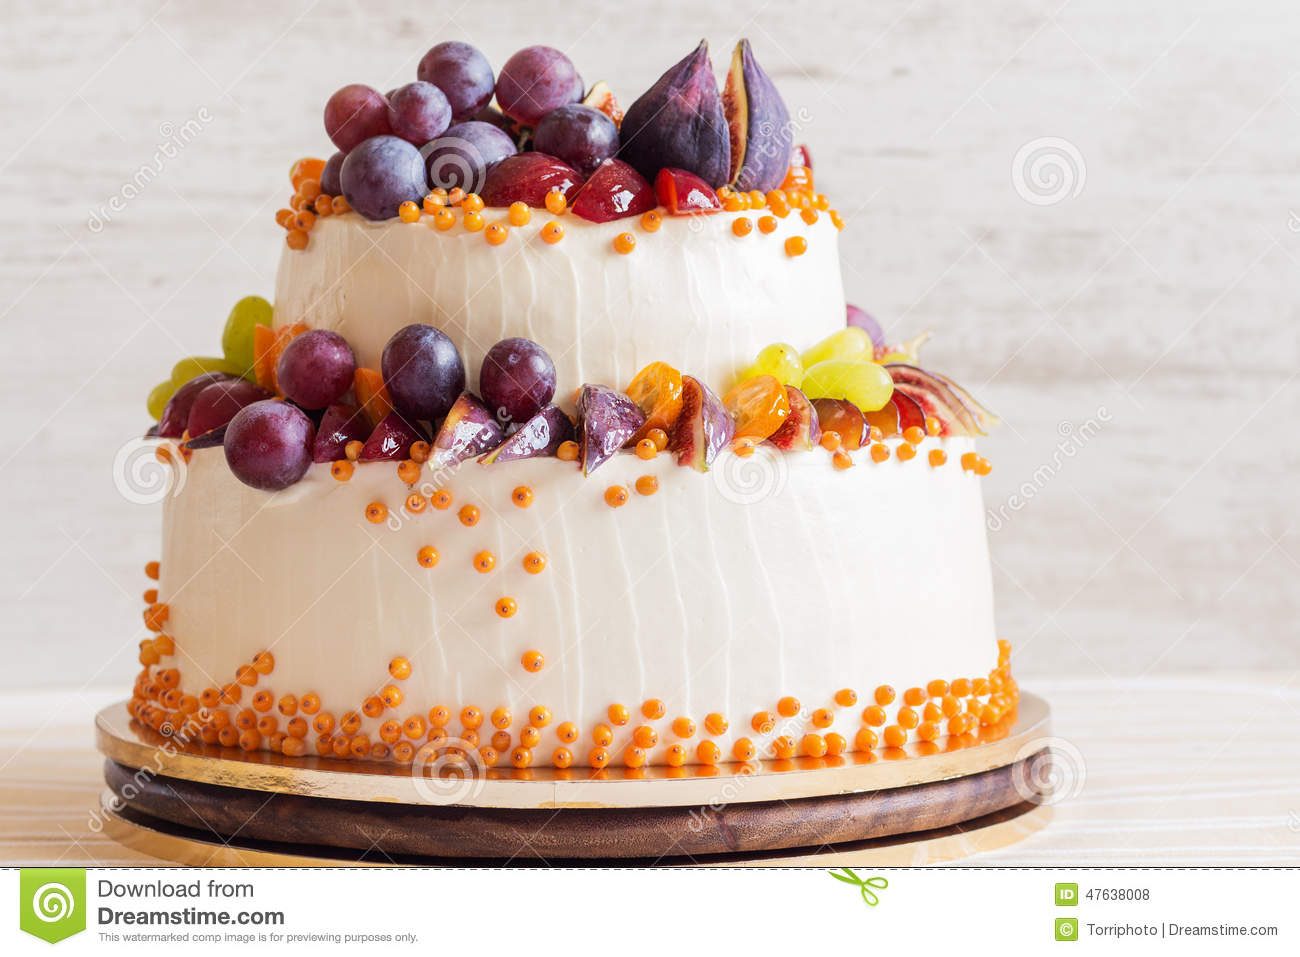 Rustic Wedding Cake with Fruits